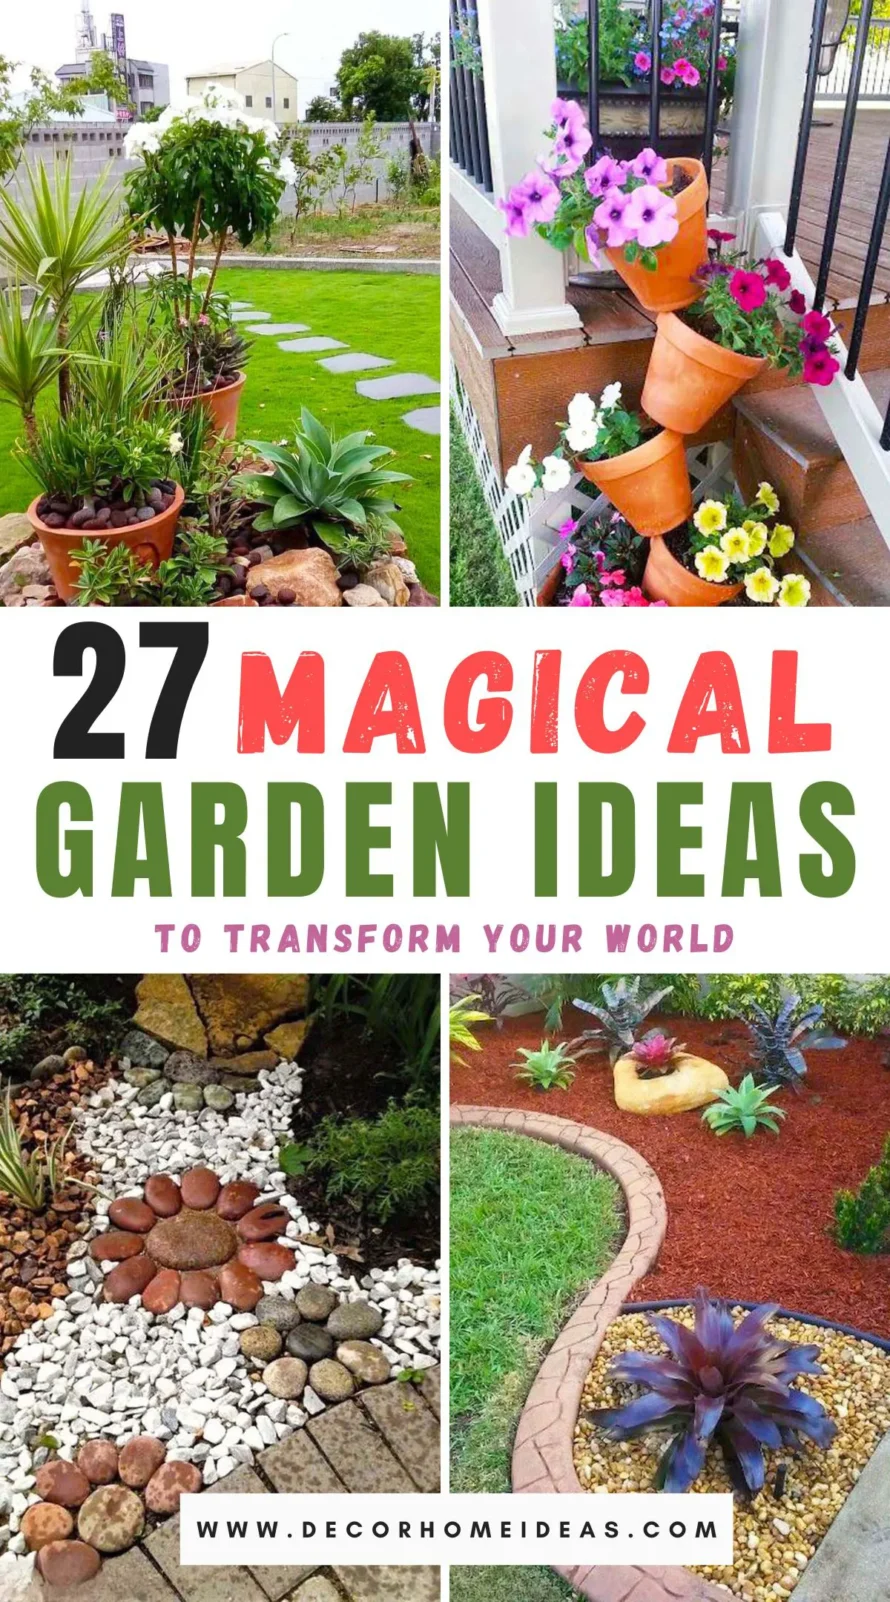 Explore 27 magical garden ideas that will completely transform your outdoor space into a whimsical wonderland. Get inspired by enchanting designs and mystical touches that bring fantasy to life right in your backyard!